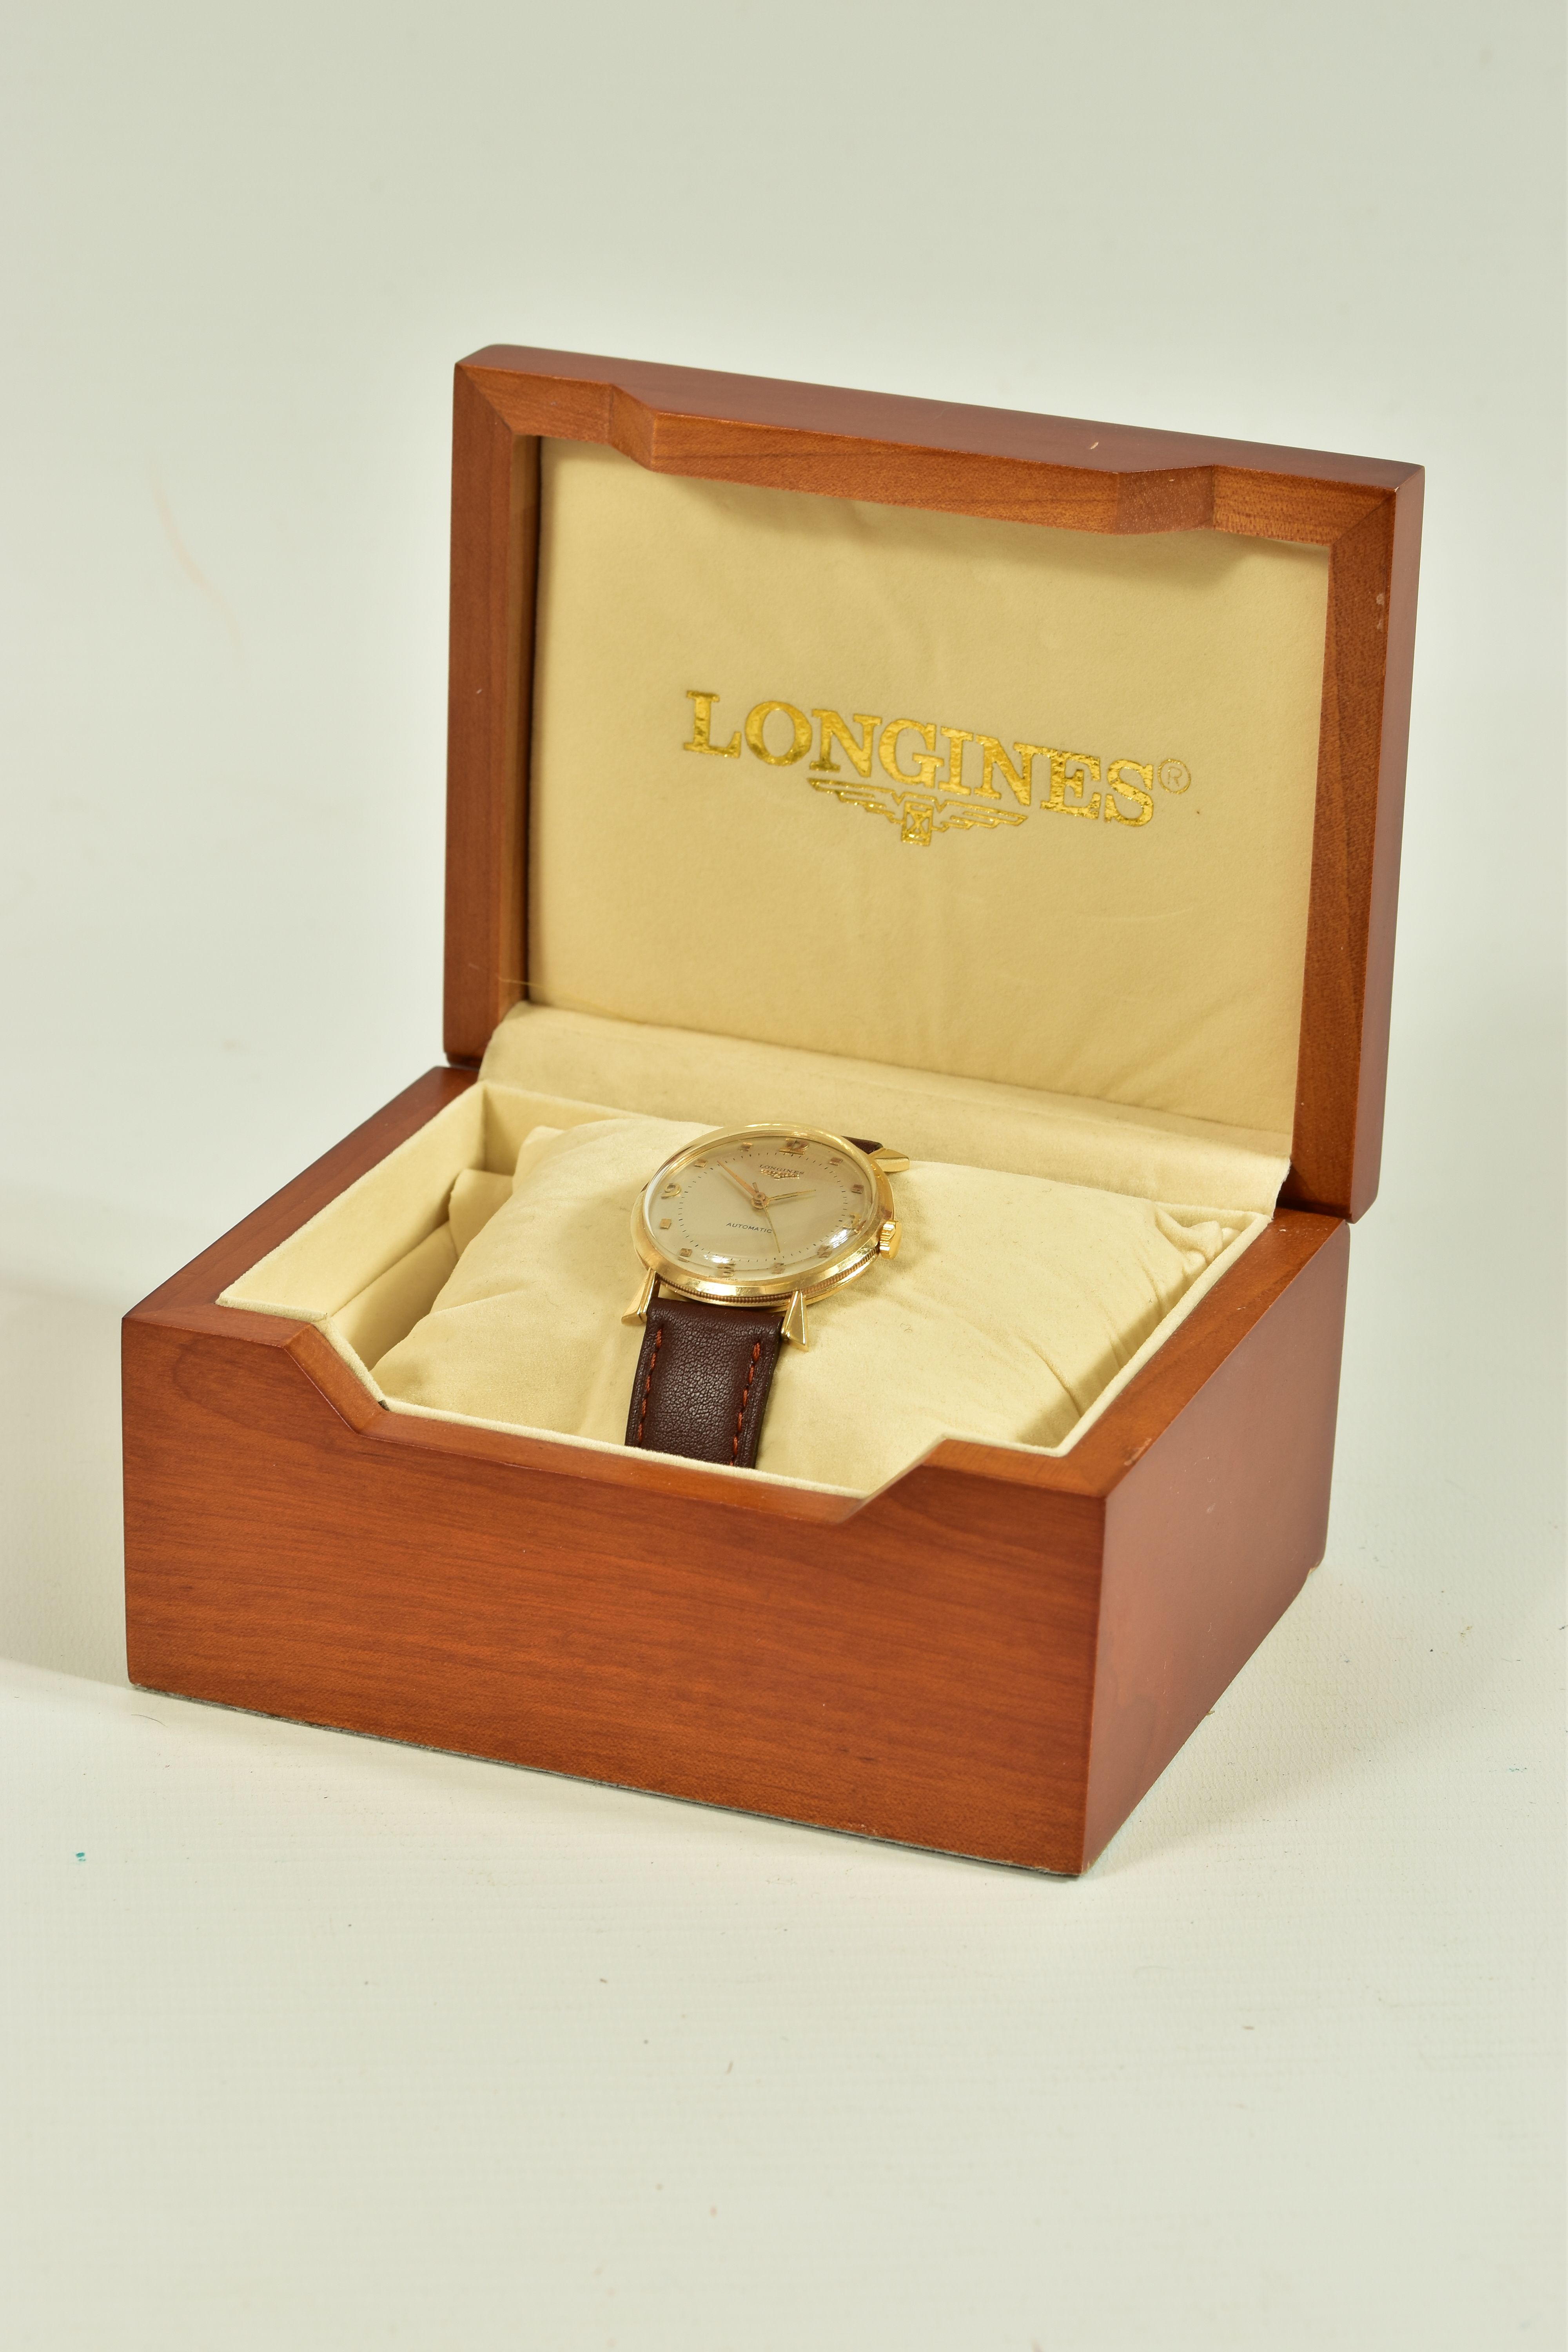 A 14CT LONGINES AUTOMATIC WRISTWATCH, silvered dial with Arabic numeral and dot markers, approximate - Image 6 of 6